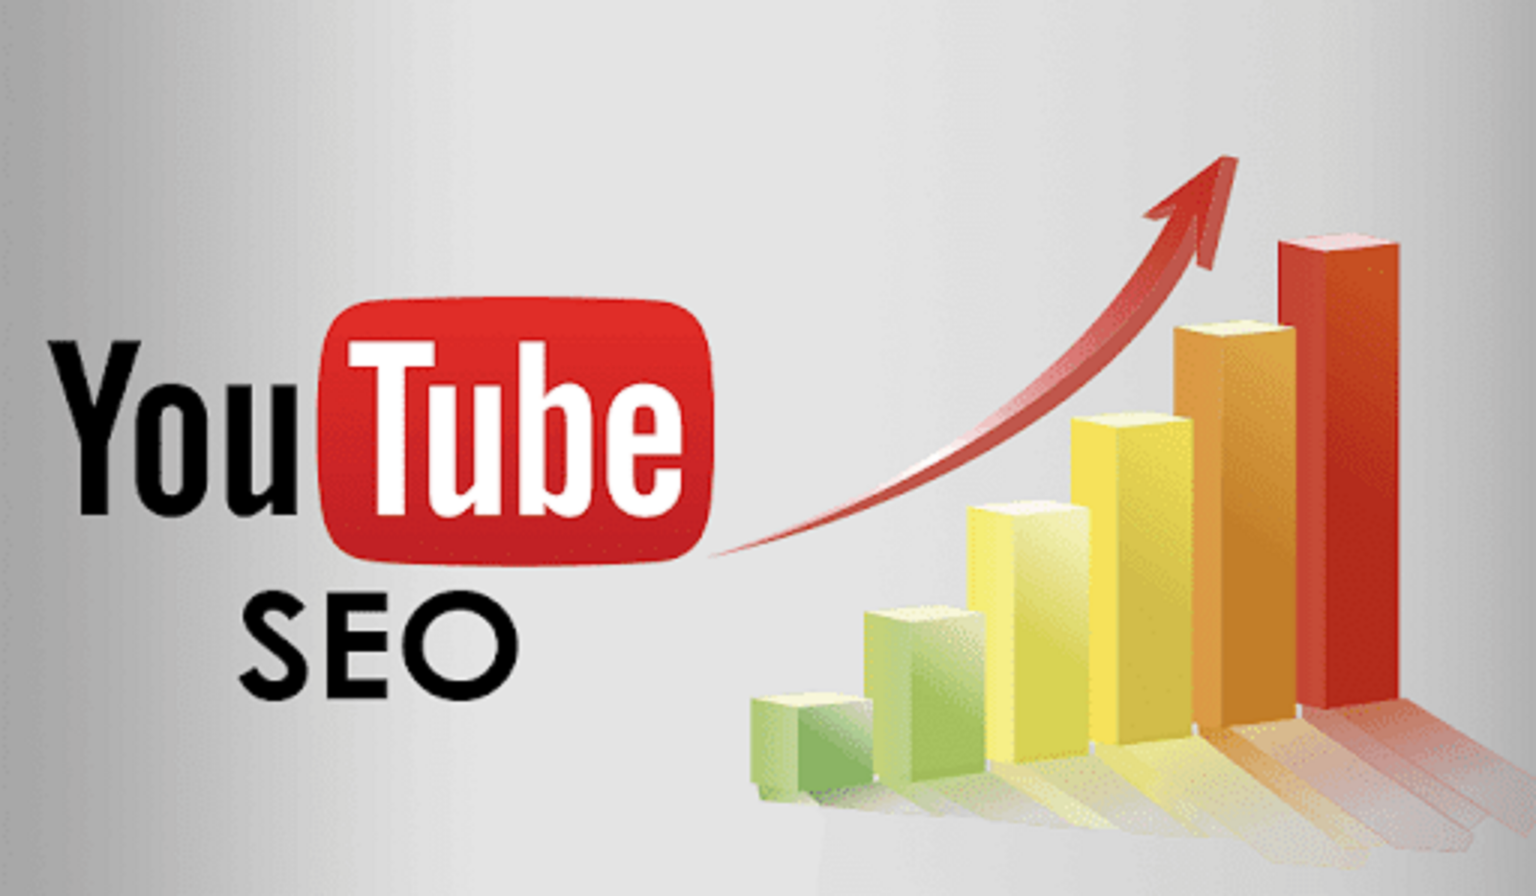 youtube-seo-services YouTube SEO Services Built for Your Business